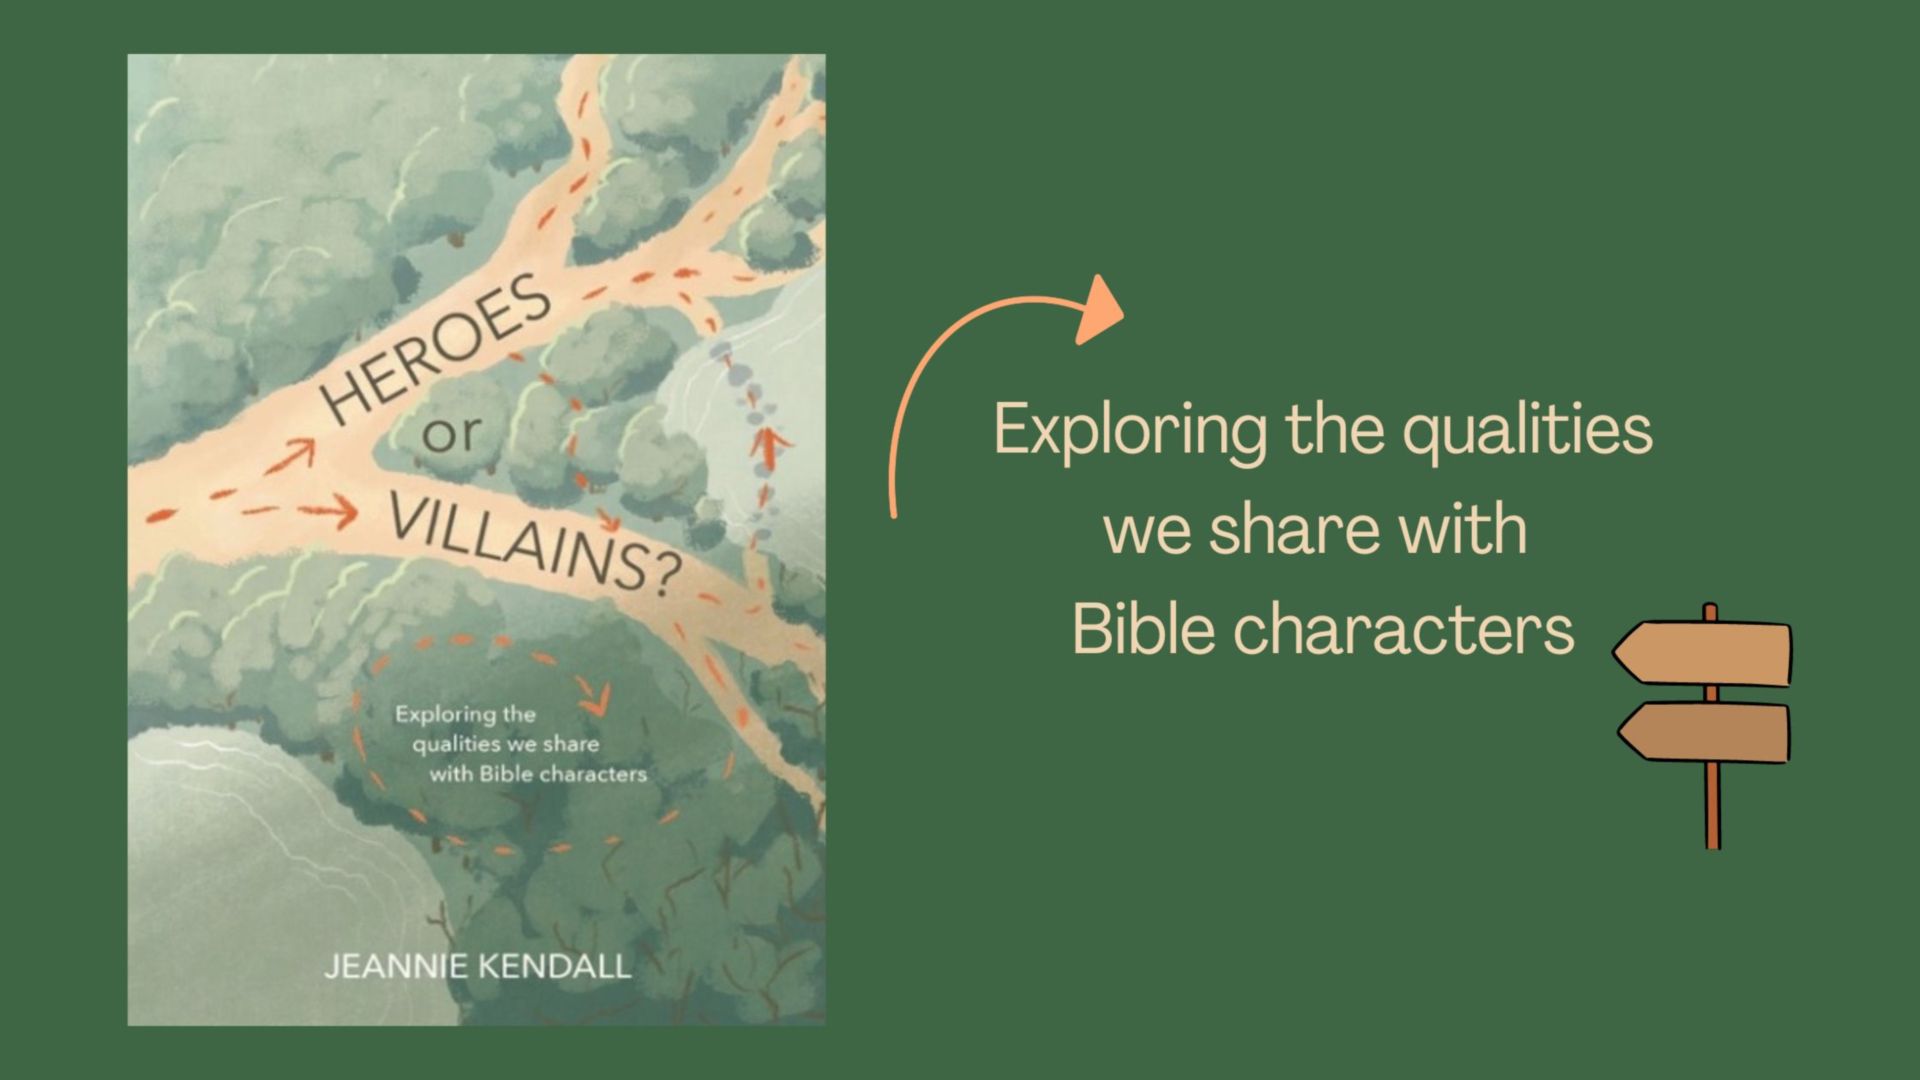 An interview with Jeannie Kendall, author of 'Heroes or Villains?'